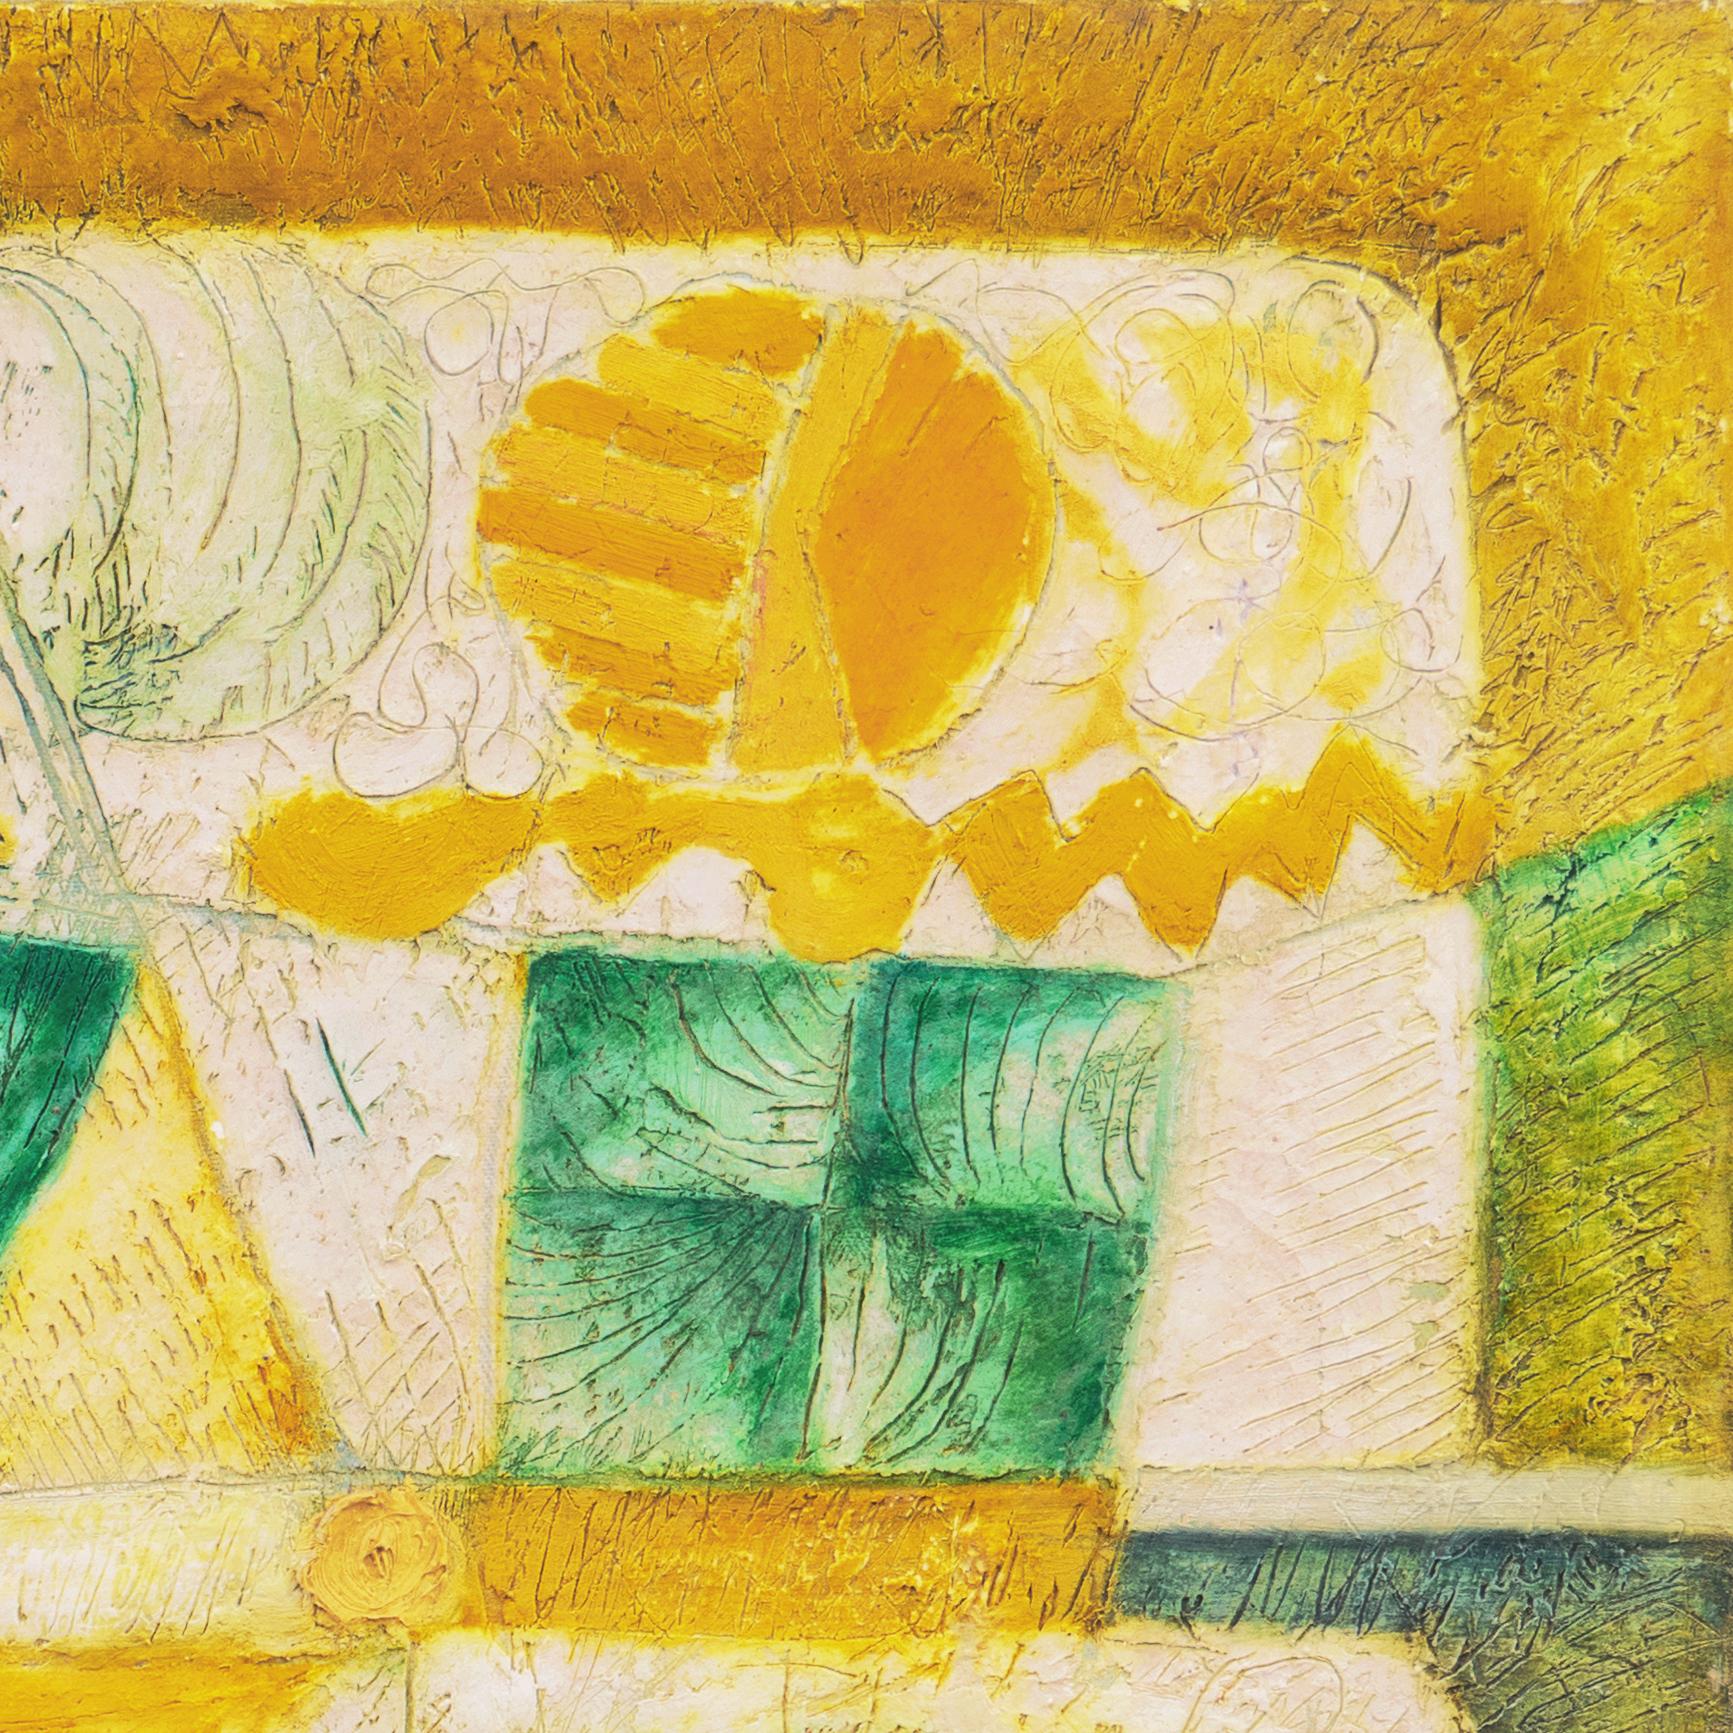 'Organic Abstract in Yellow and Green', Jakarta, Indonesian Art Academy, Ghent - Beige Abstract Painting by Aming Prayitno